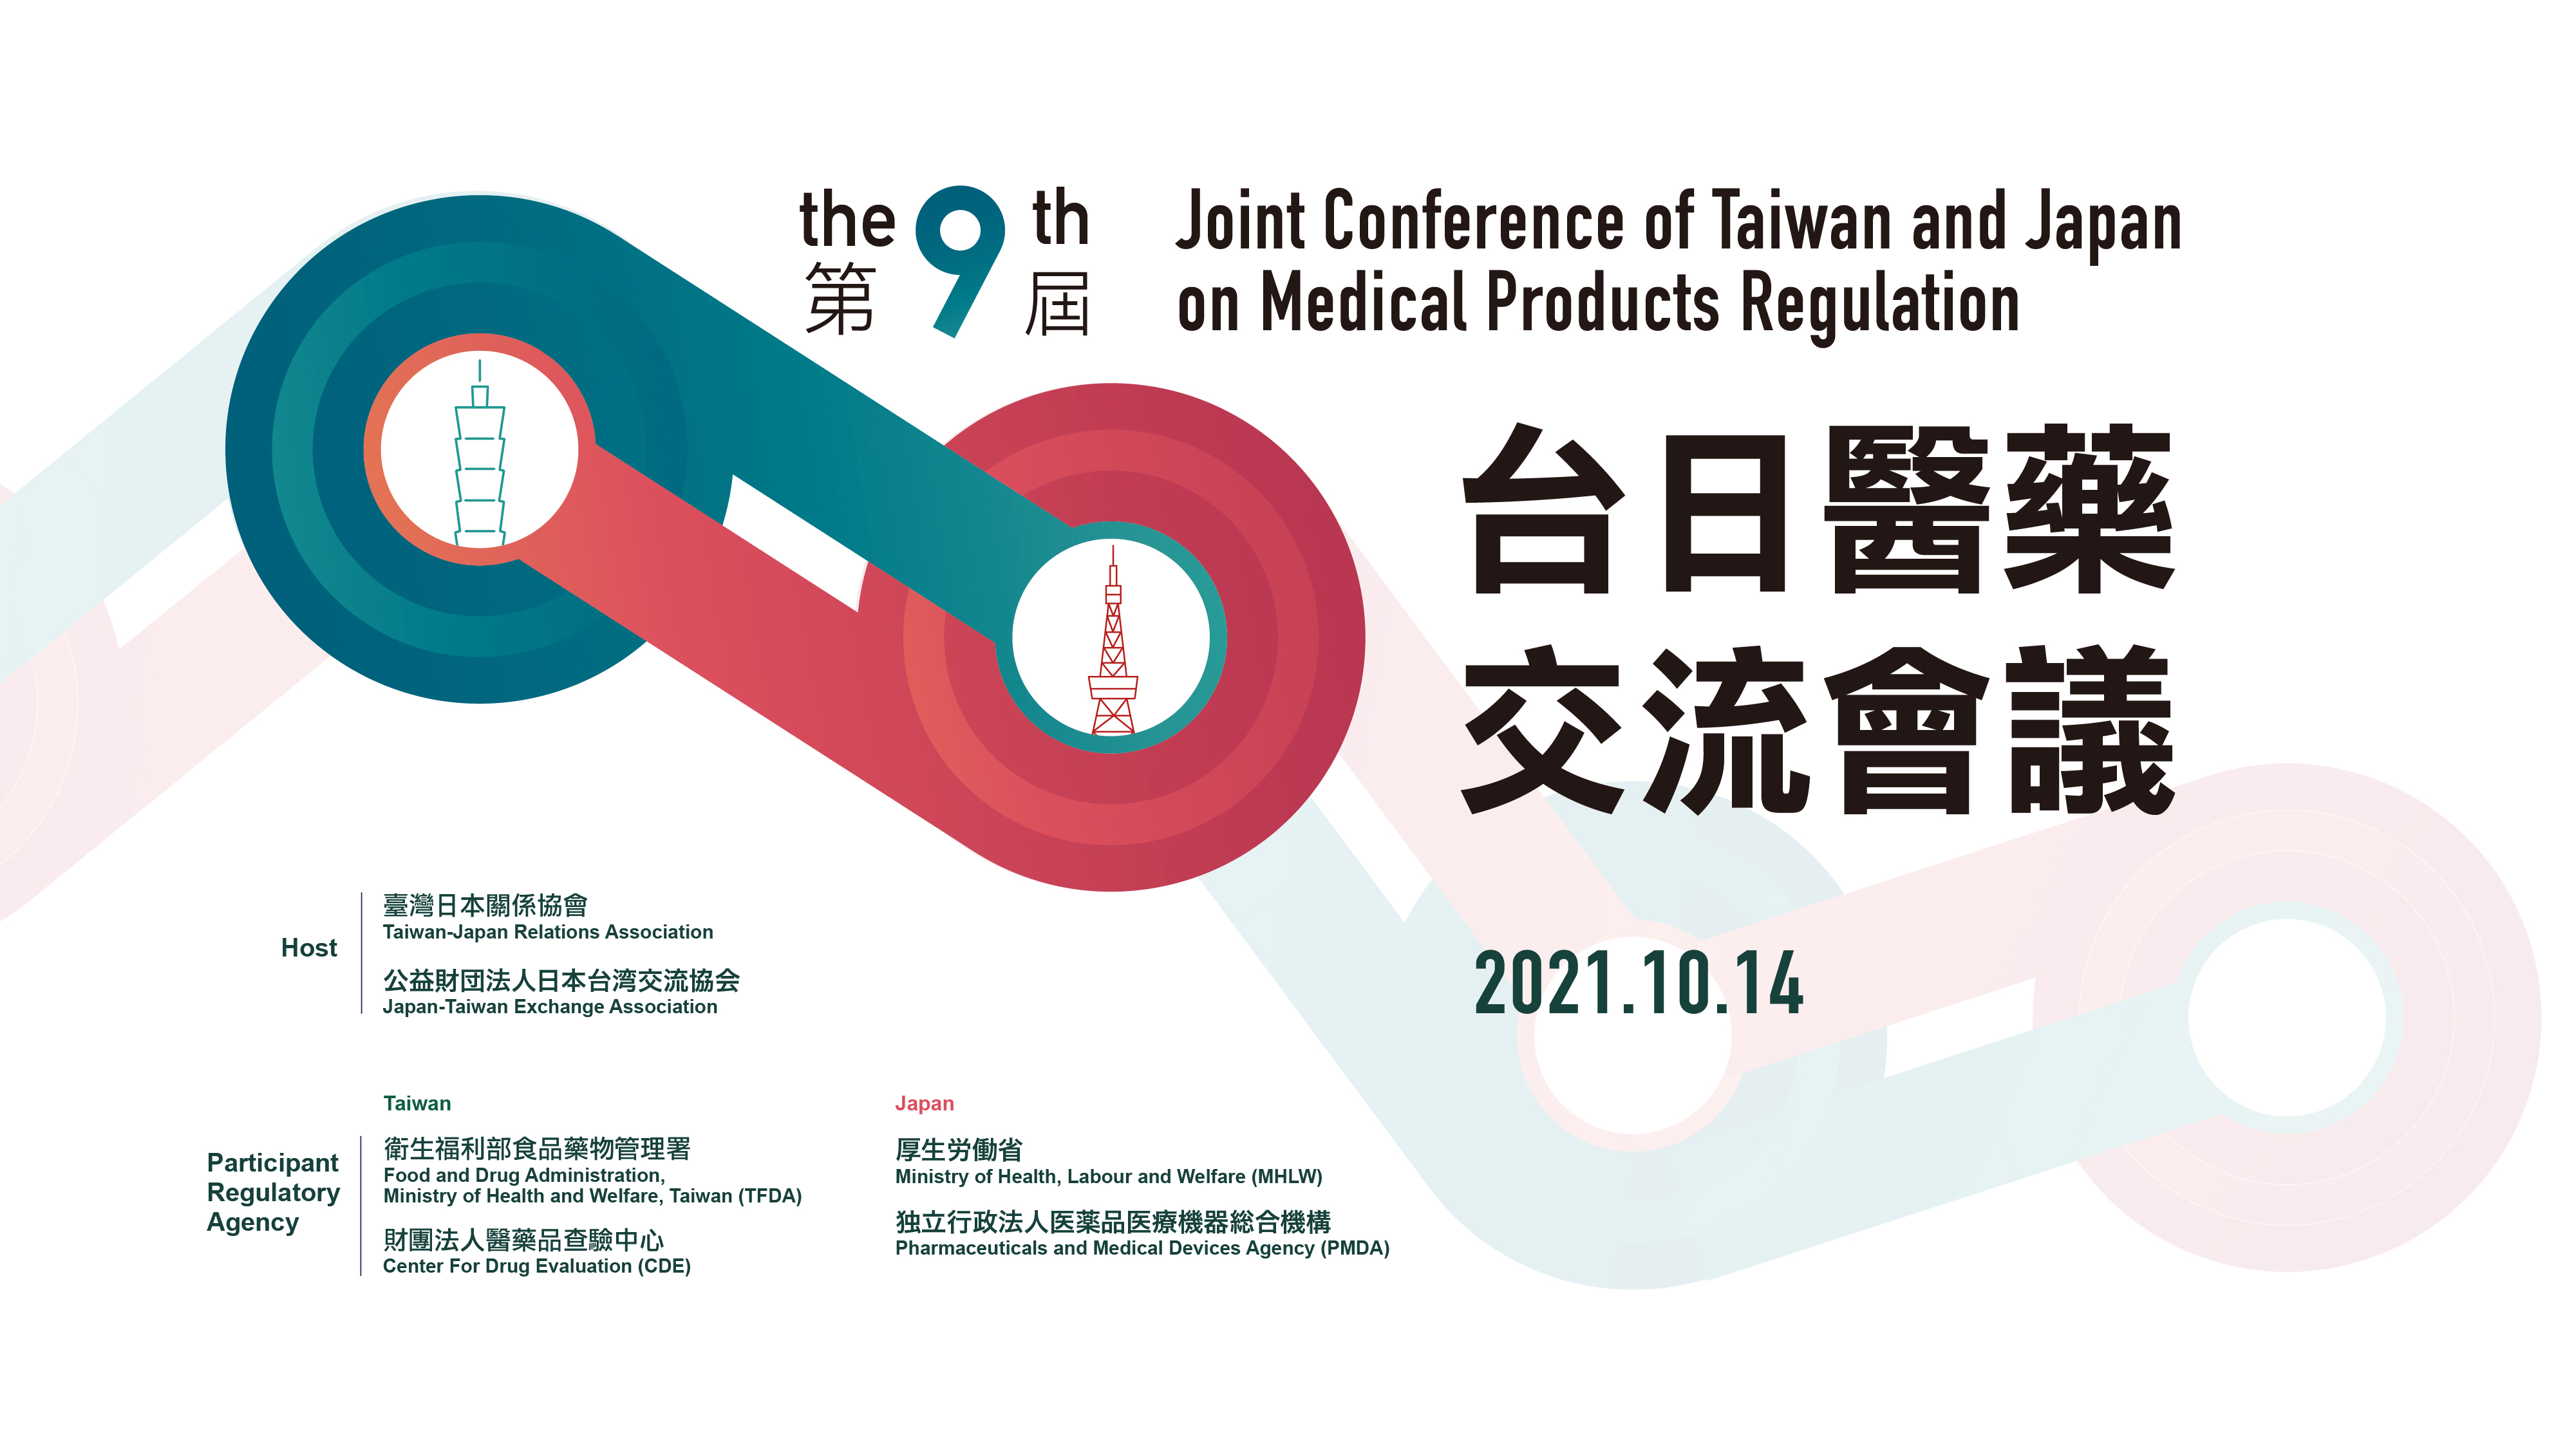 The 9th Joint Conference of Taiwan and Japan on Medical Products Regulation